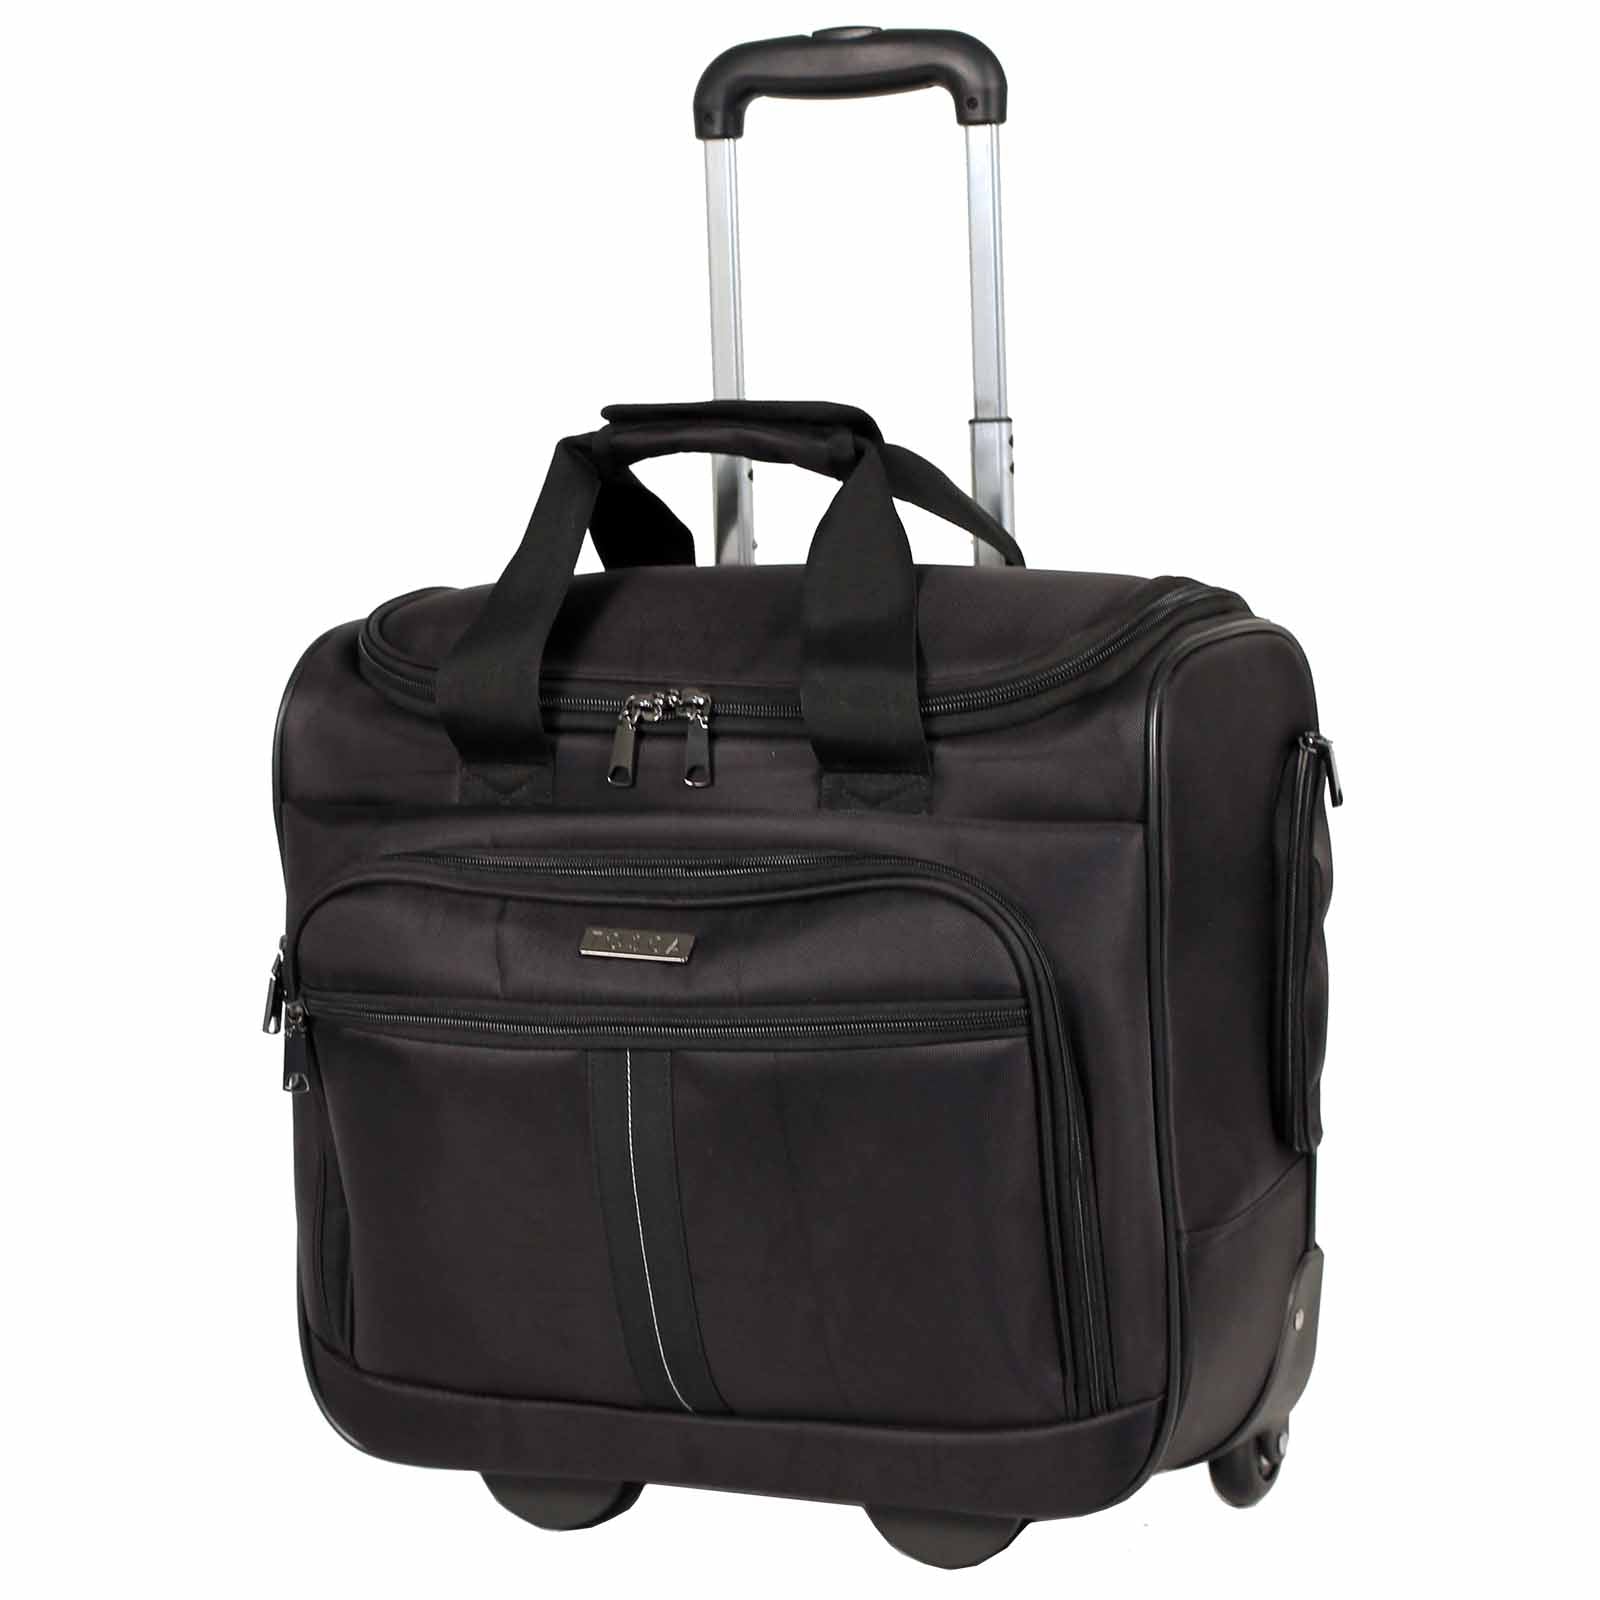 Tosca_Business_15.4inch_Laptop_Rolling_Tote_Black_Front.jpg